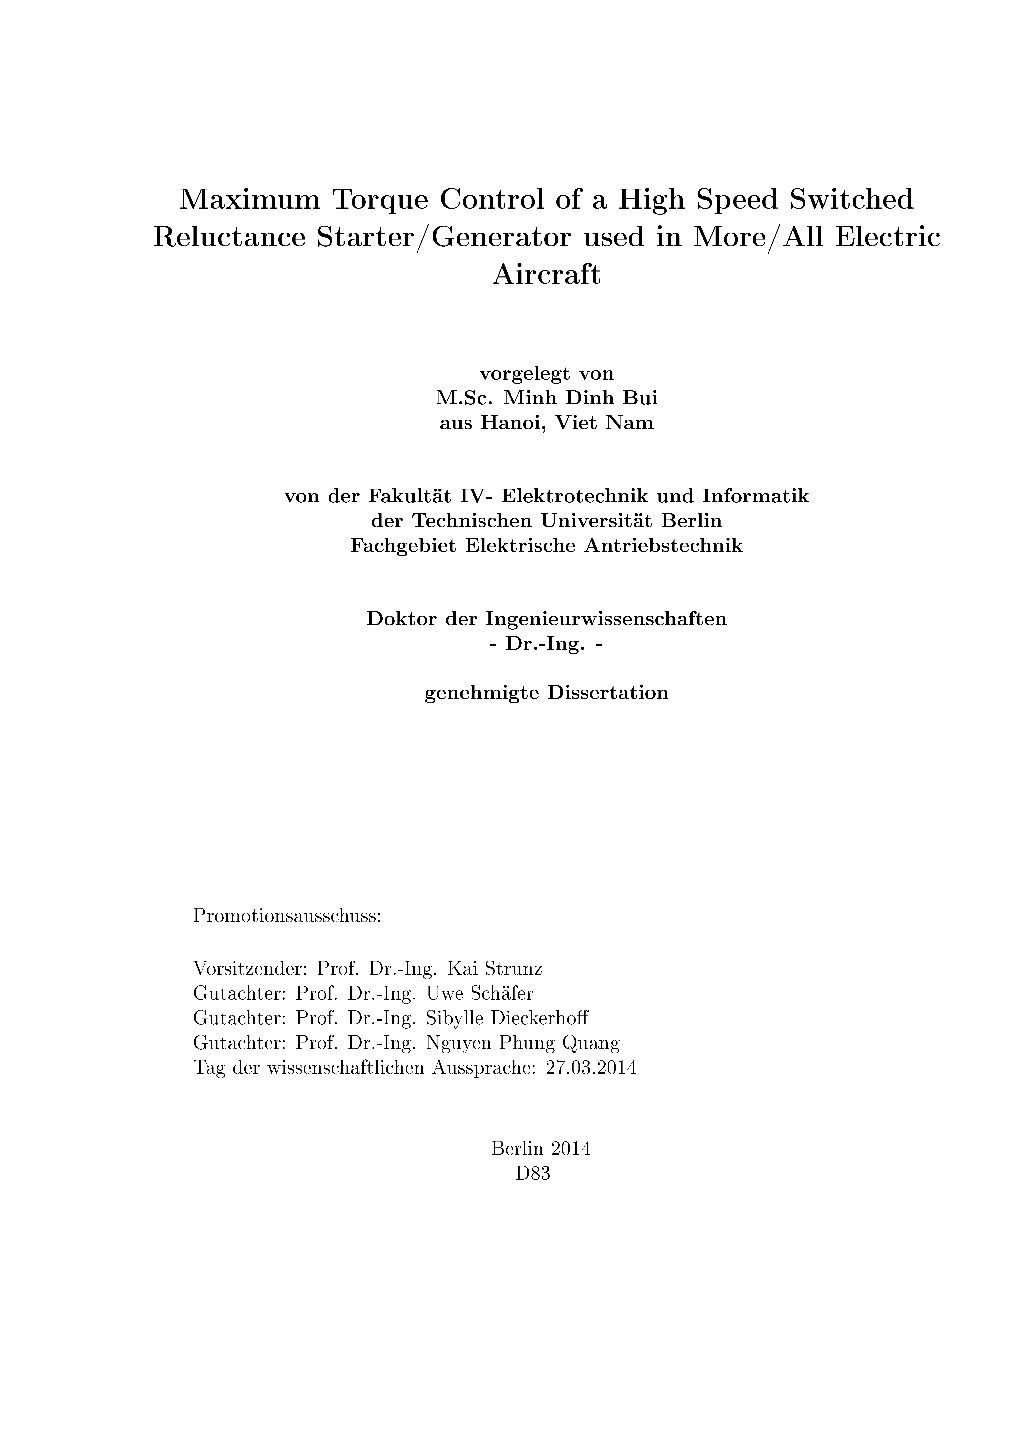 Maximum Torque Control of a High Speed Switched Reluctance Starter/Generator Used in More/All Electric Aircraft